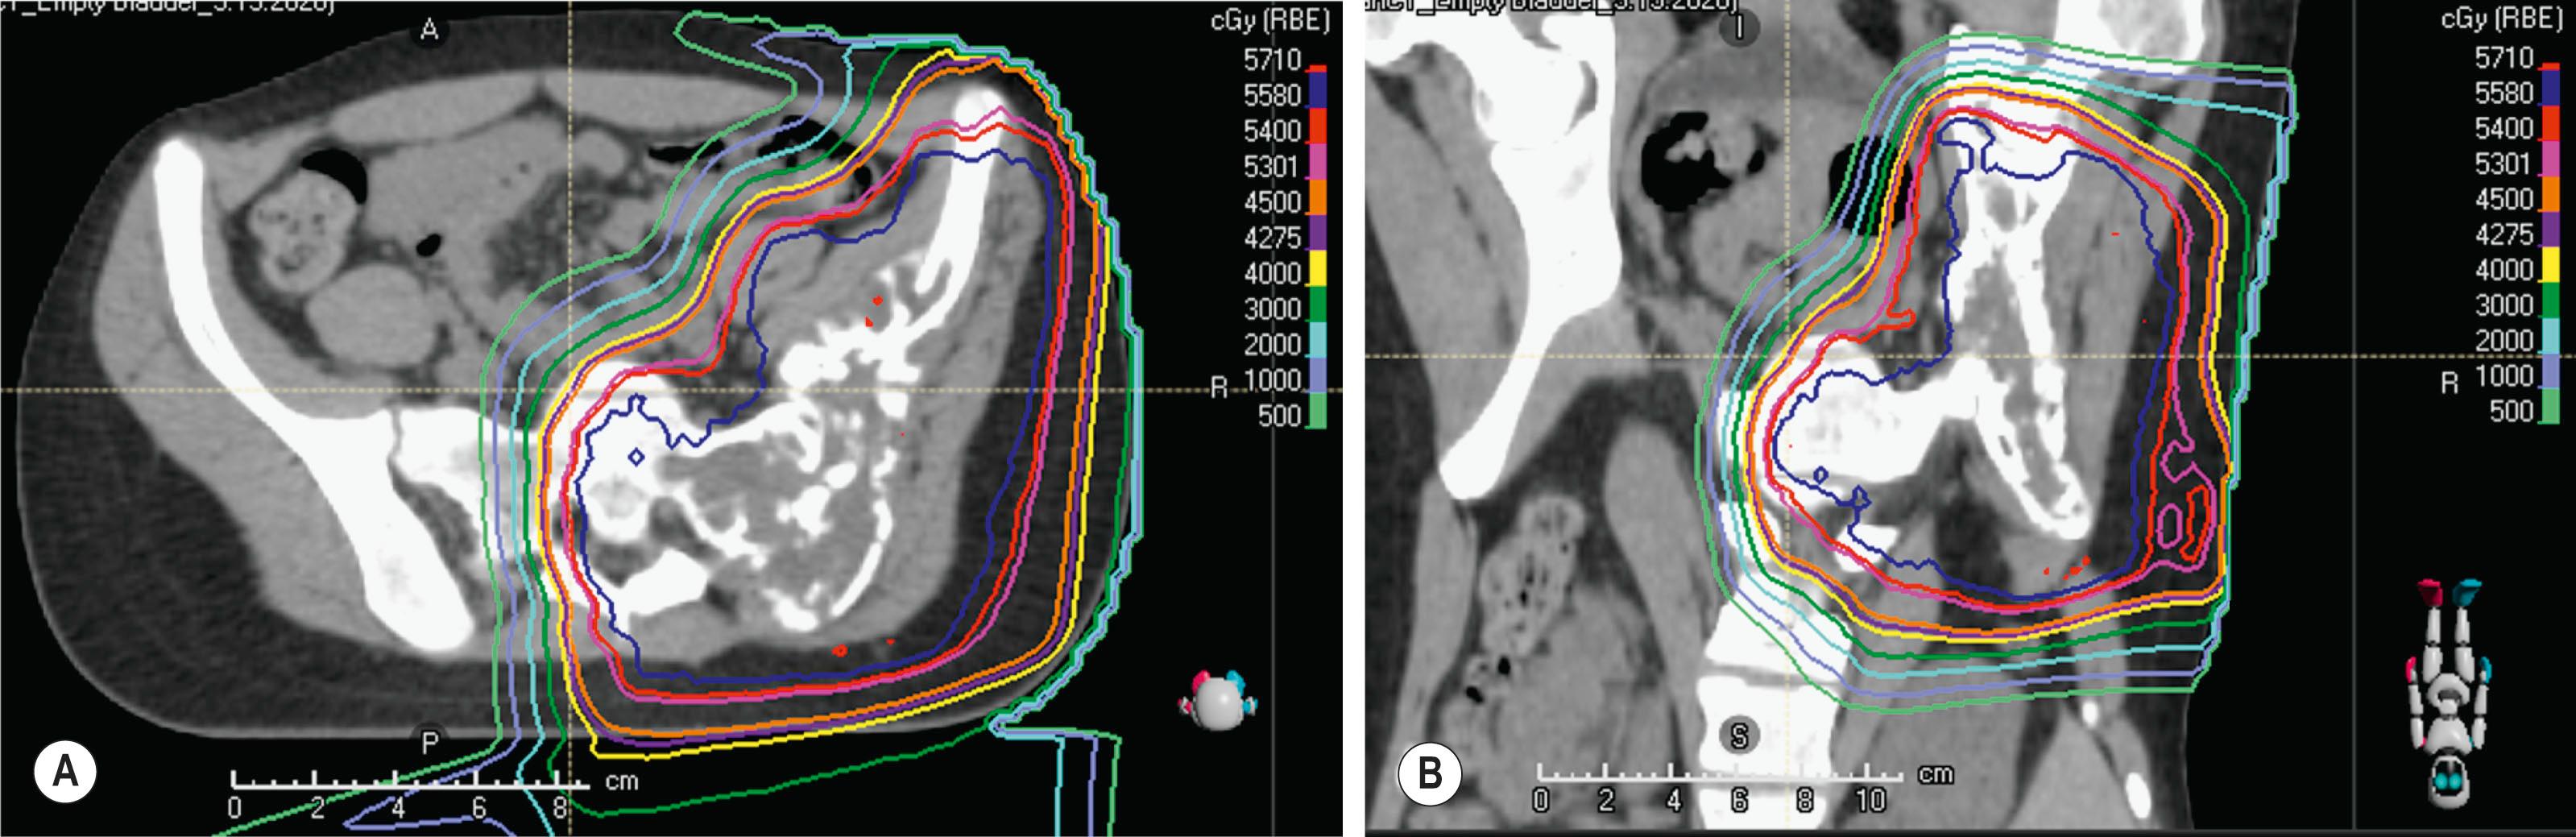 Figure 27.4, (A,B) A 13-year-old girl with a pelvic Ewing sarcoma treated to a definitive dose of 55.8 Gy in 31 fractions with concurrent chemotherapy. Proton therapy allowed for ptimal sparing of pelvic organs including a uterus max dose of 9.2 Gy, ipsilateral ovary mean dose of 14 Gy, and most importantly a contralateral ovary dose of <1 Gy, which should retain endocrine and fertility function.